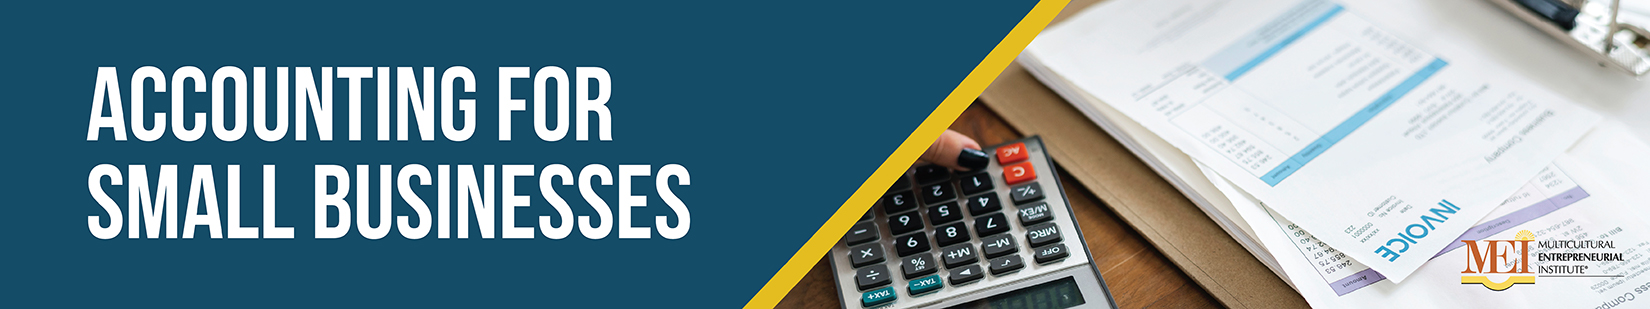 accounting website banner-01